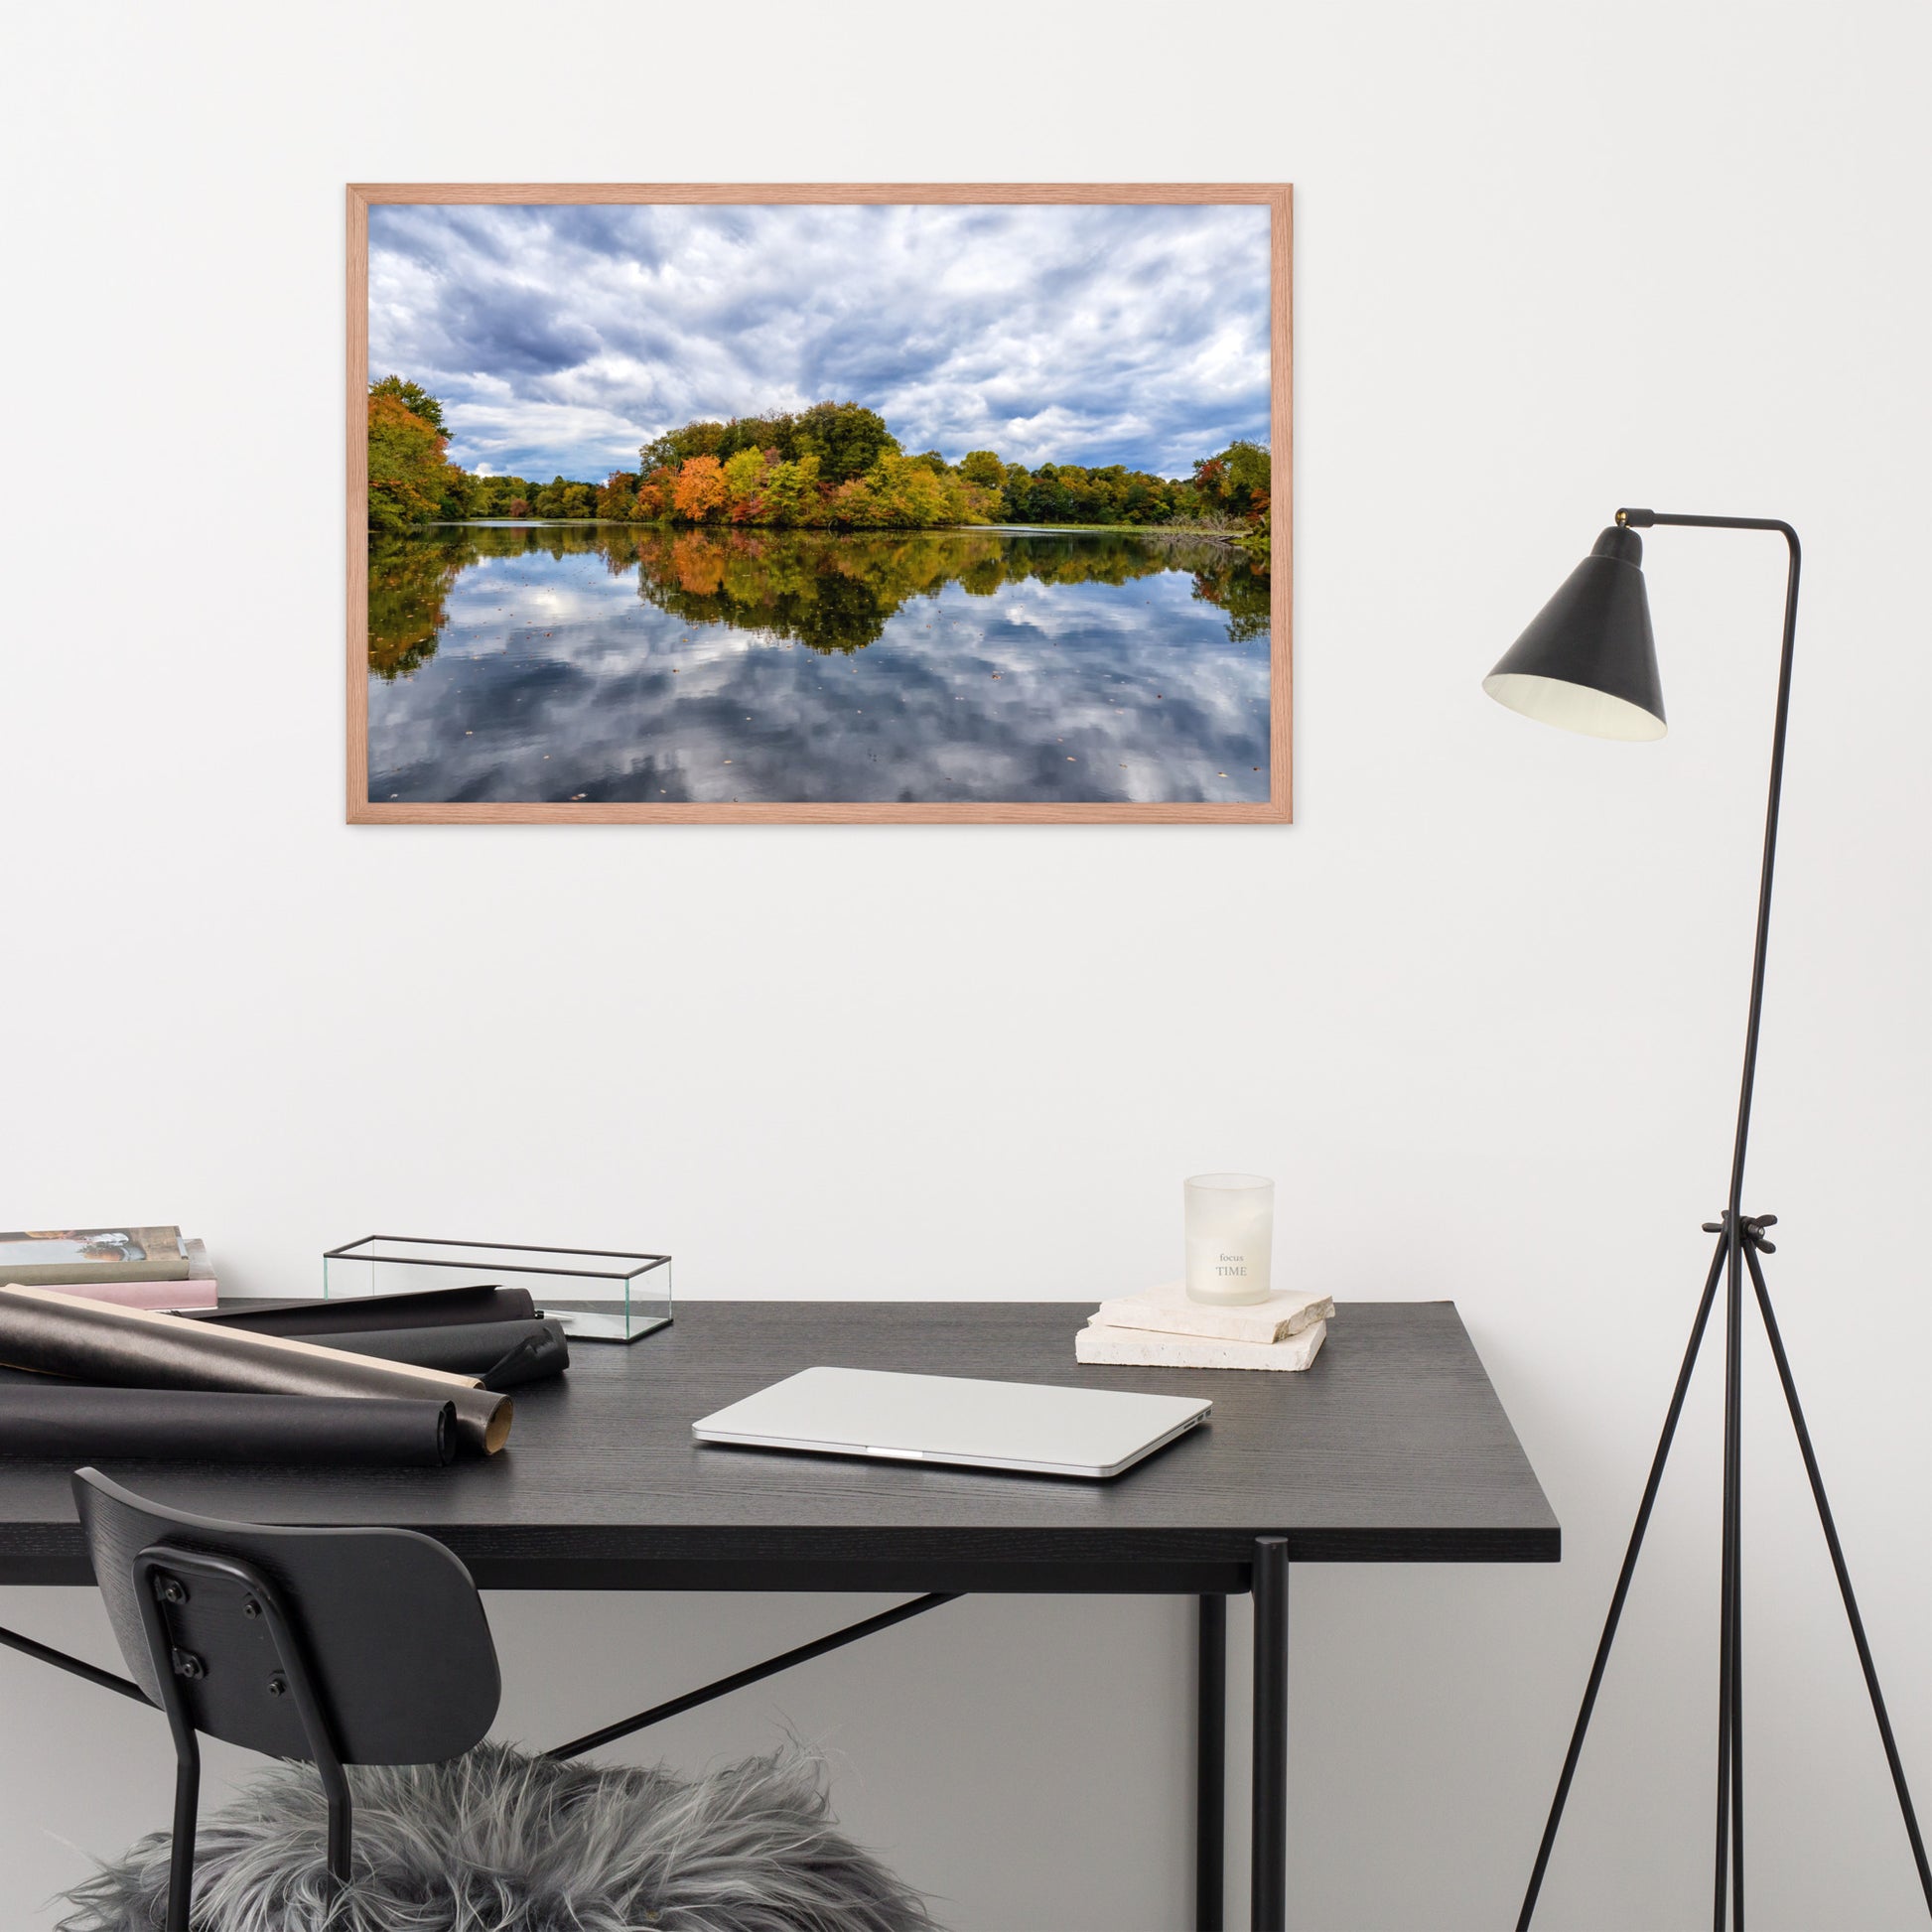 Wall Art For A Home Office: Autumn Reflections - Rural / Country / Farmhouse Style Landscape / Nature Photograph Framed Wall Art Print - Artwork